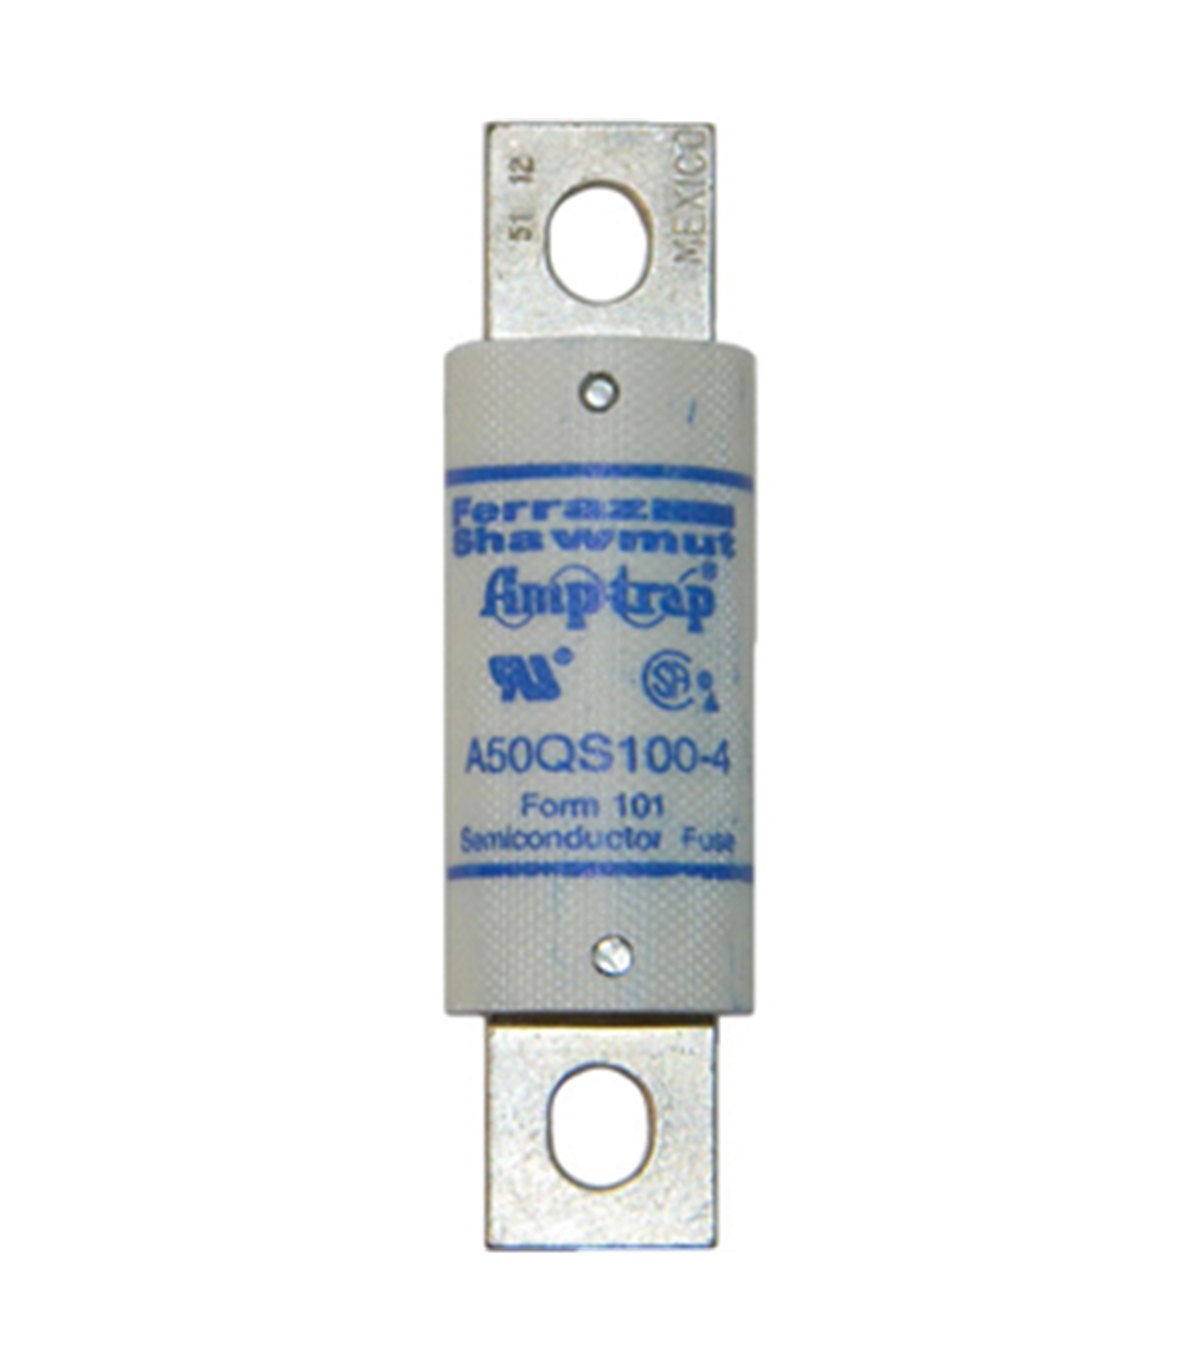 Fusible Smd 24v 1206, Time-delay Fuse, Fusible 5a 24v